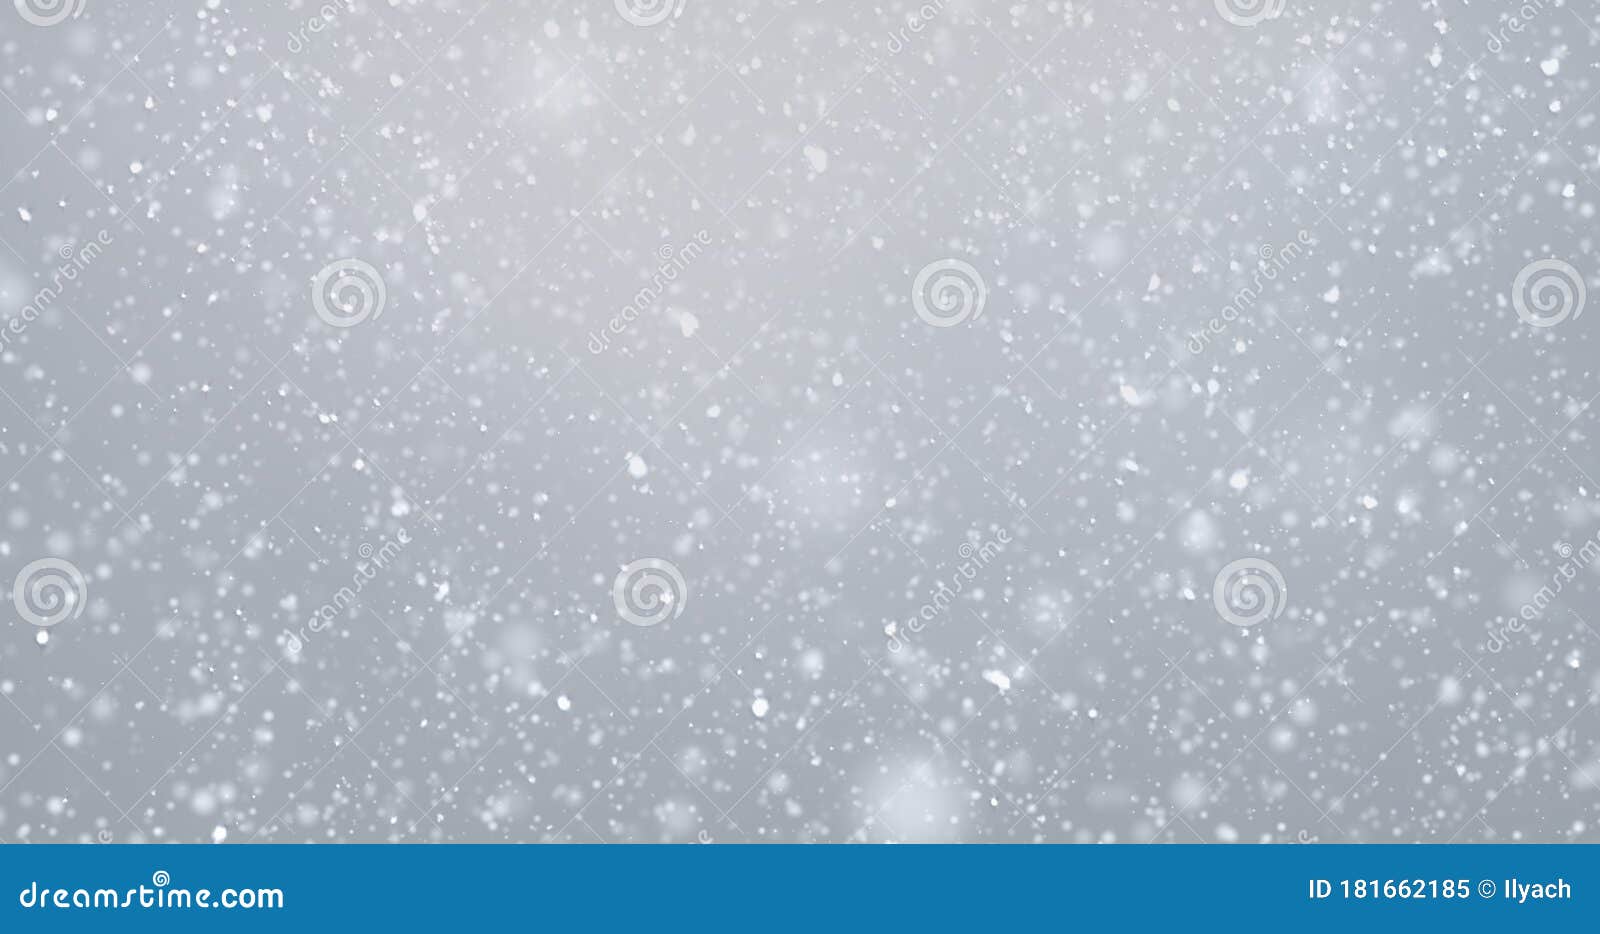 snow fall snowflakes background,  overlay white snowfall light. snow flakes falling with bokeh effect and winter glitter